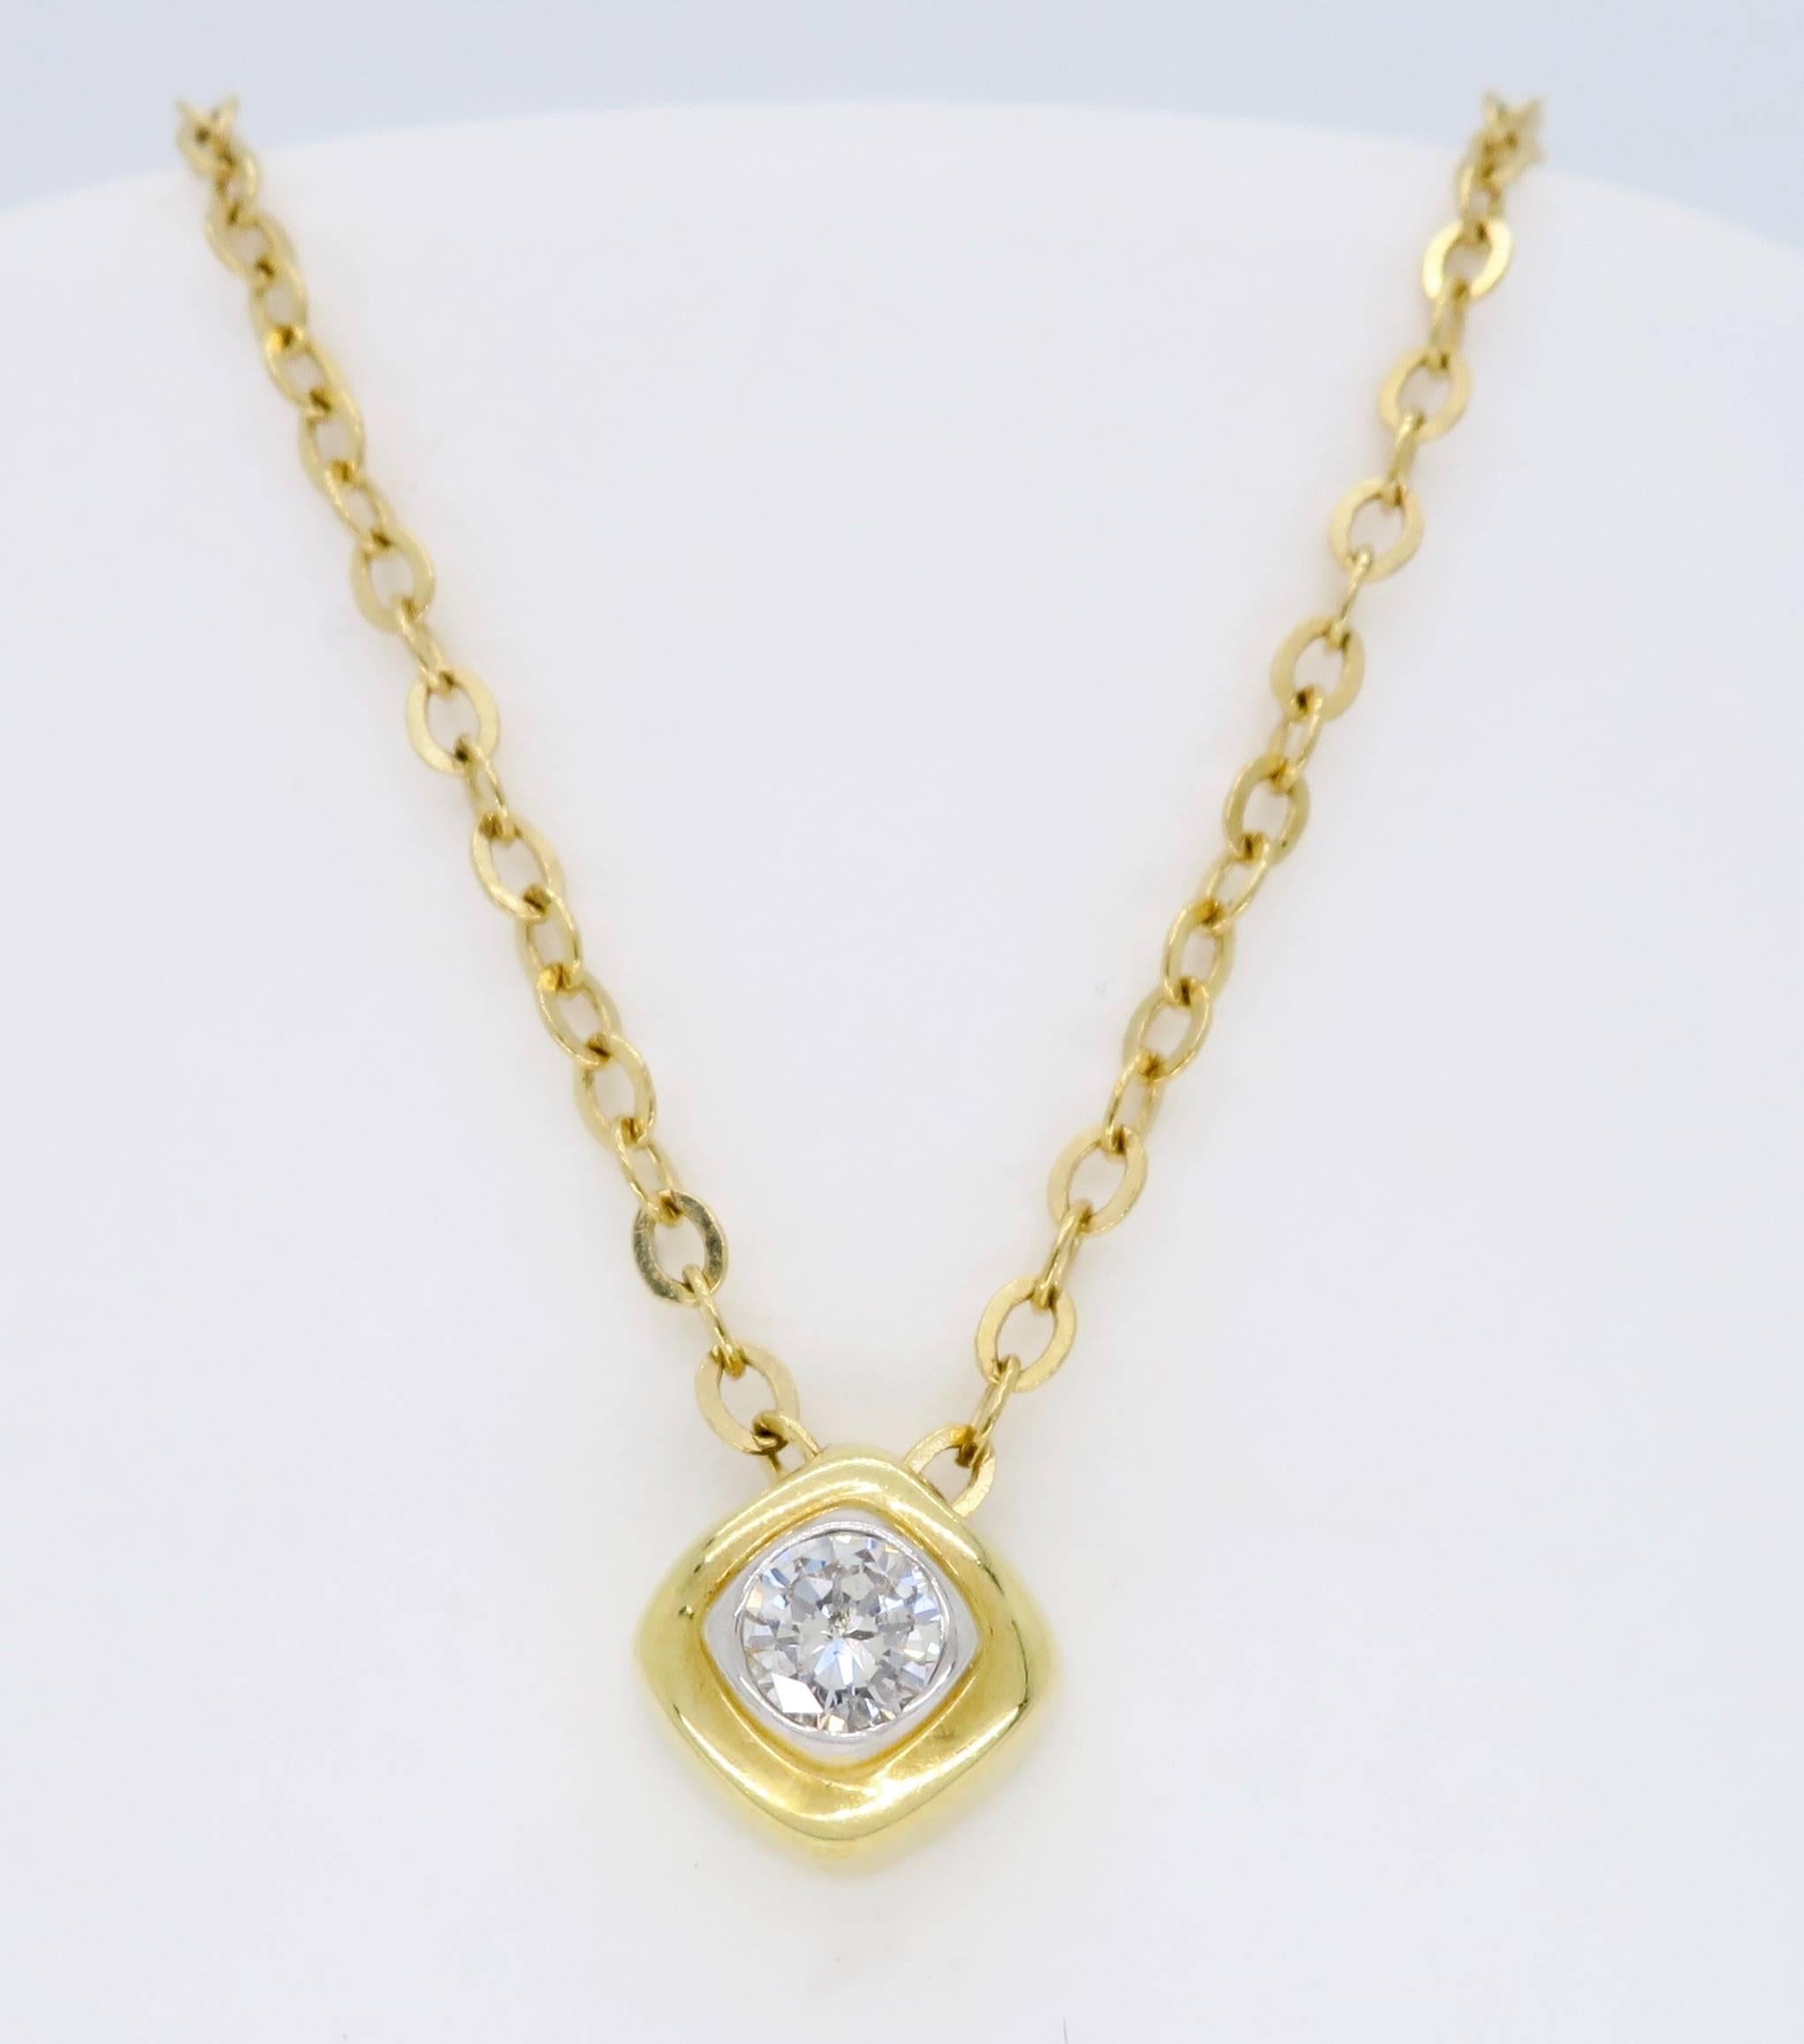 14K yellow gold necklace features an .18CT Round Brilliant Cut Diamond. The beautiful diamond is bezel set in a petite soft cornered diamond shaped pendant.  The featured diamond displays J-K color and SI2 clarity. The necklace is 18” long and